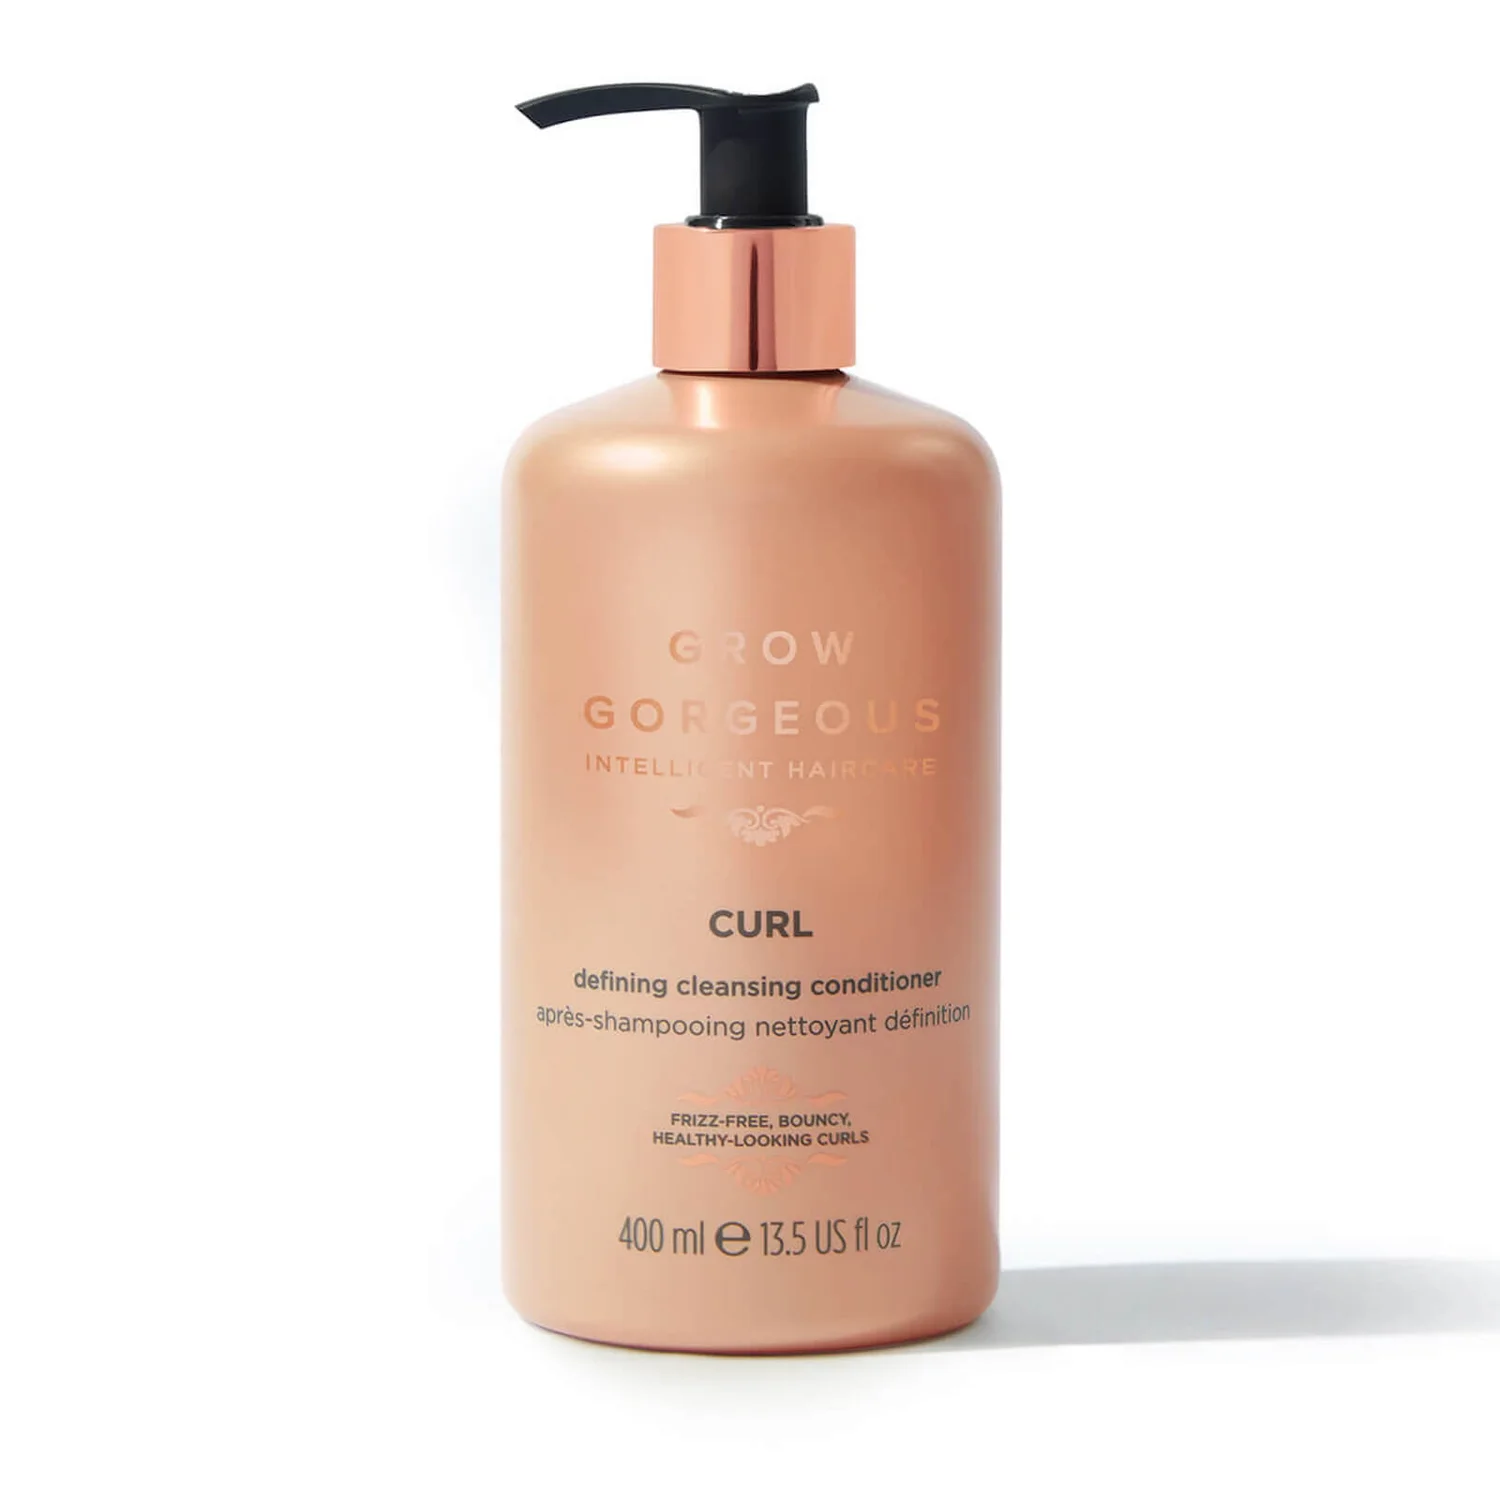 Grow gorgeous cleansing conditioner